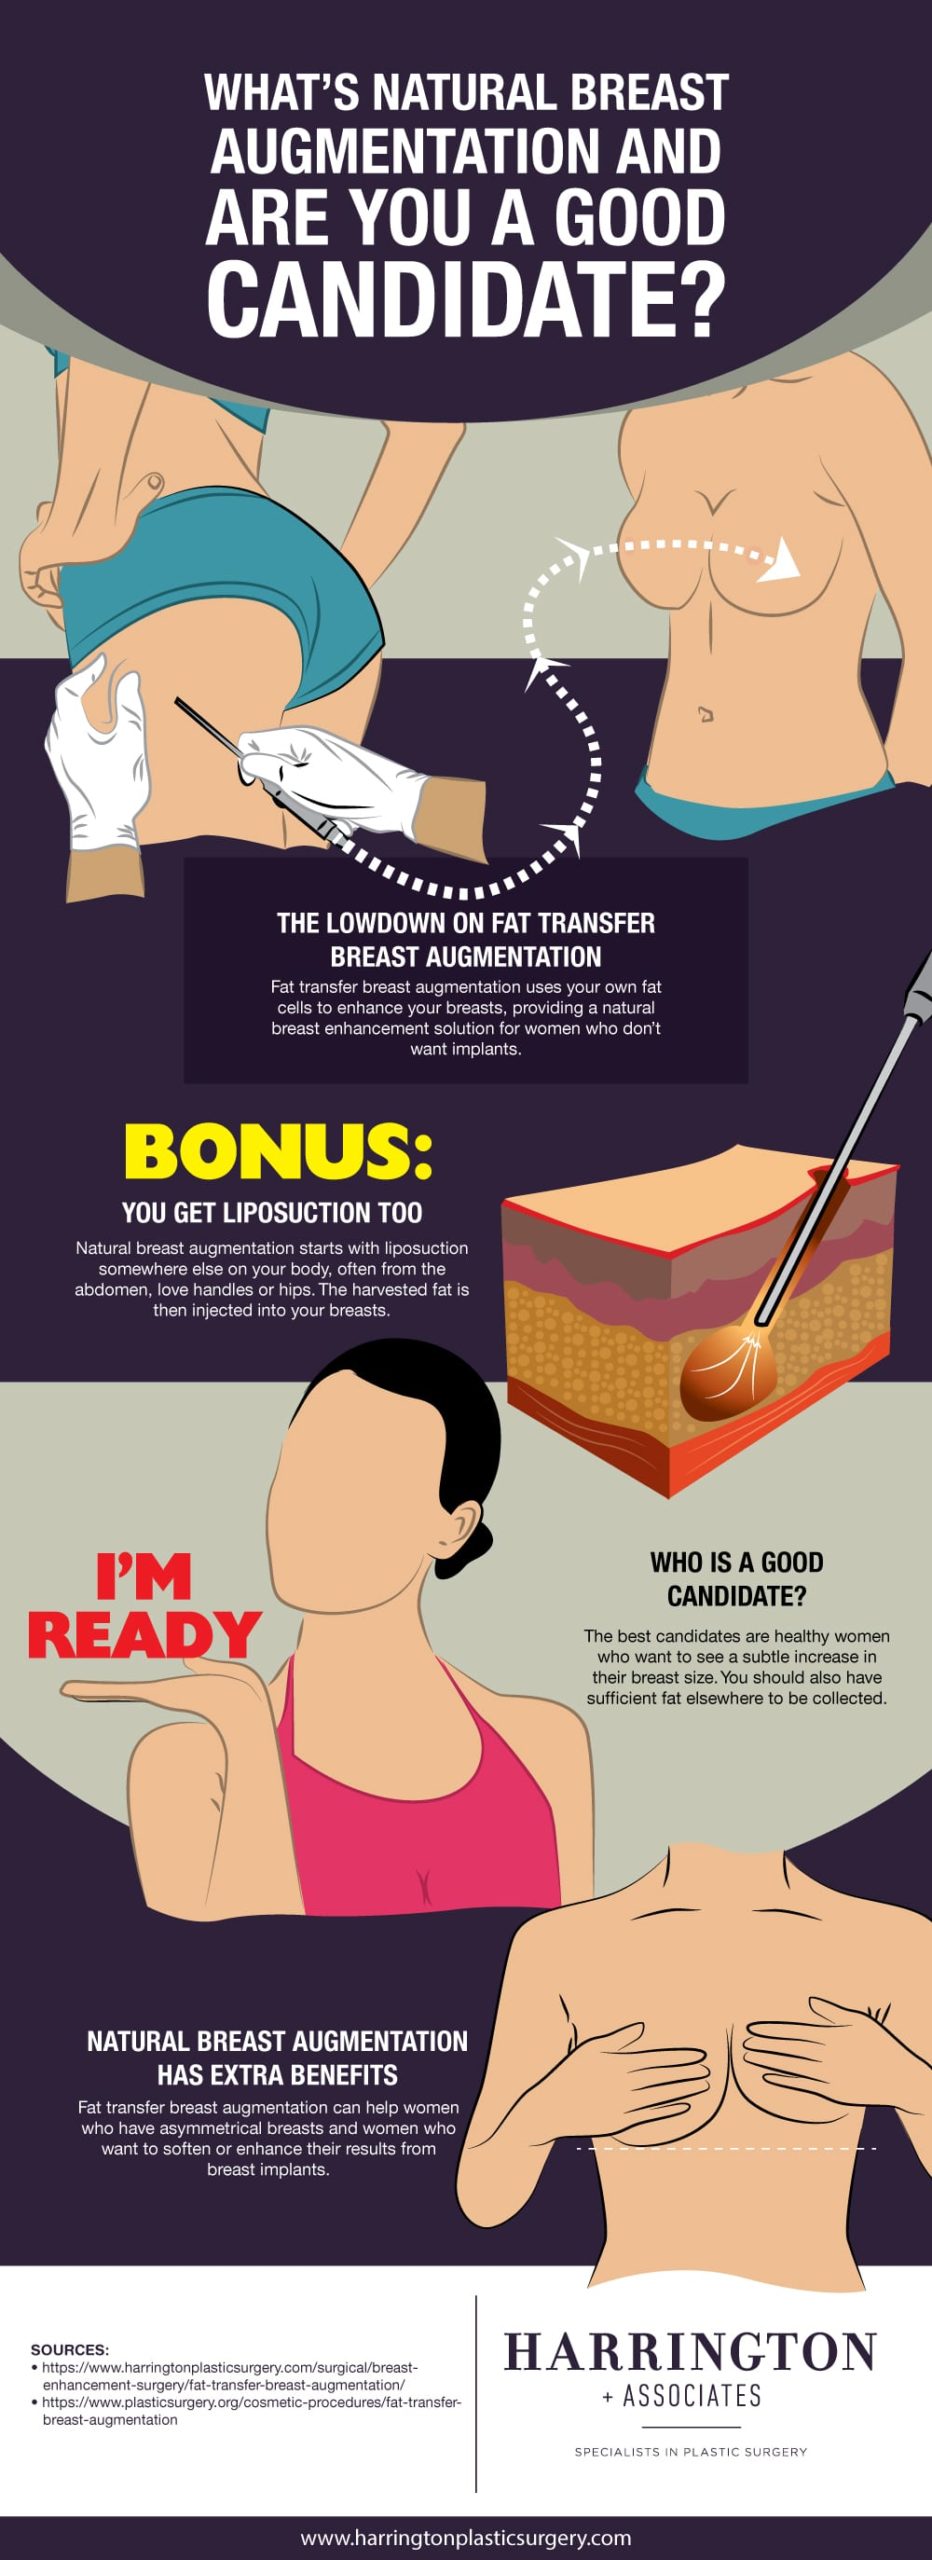 What's Natural Breast Augmentation? Are You a Candidate? [Infographic]